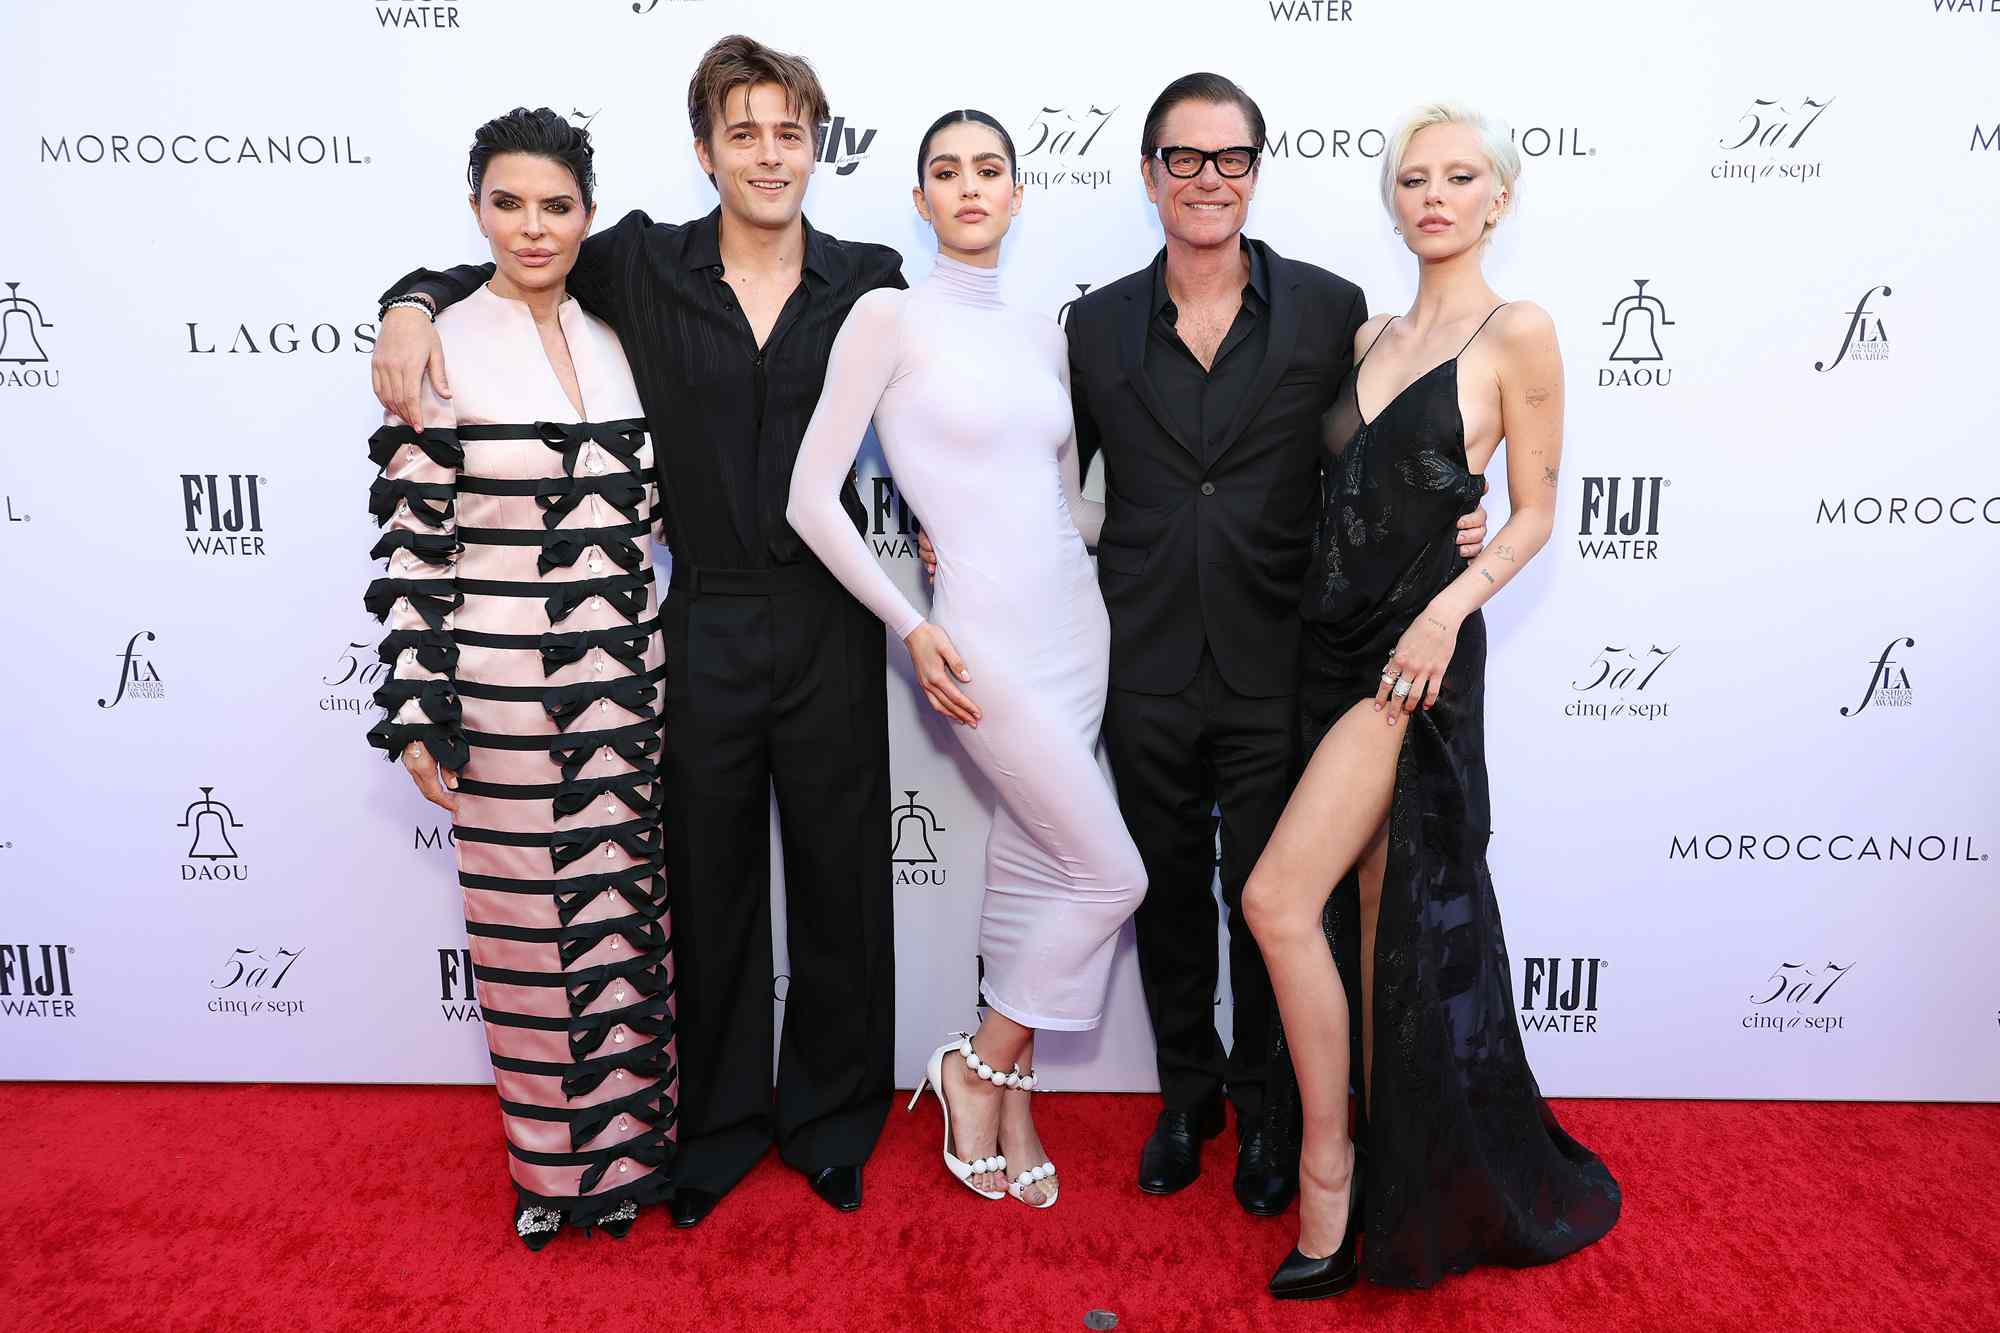 Lisa Rinna, Henry Eikenberry, Amelia Gray Hamlin, Harry Hamlin, and Delilah Belle Hamlin attend The Daily Front Row's 8th Annual Fashion Los Angeles Awards on April 28, 2024 in Beverly Hills, California.